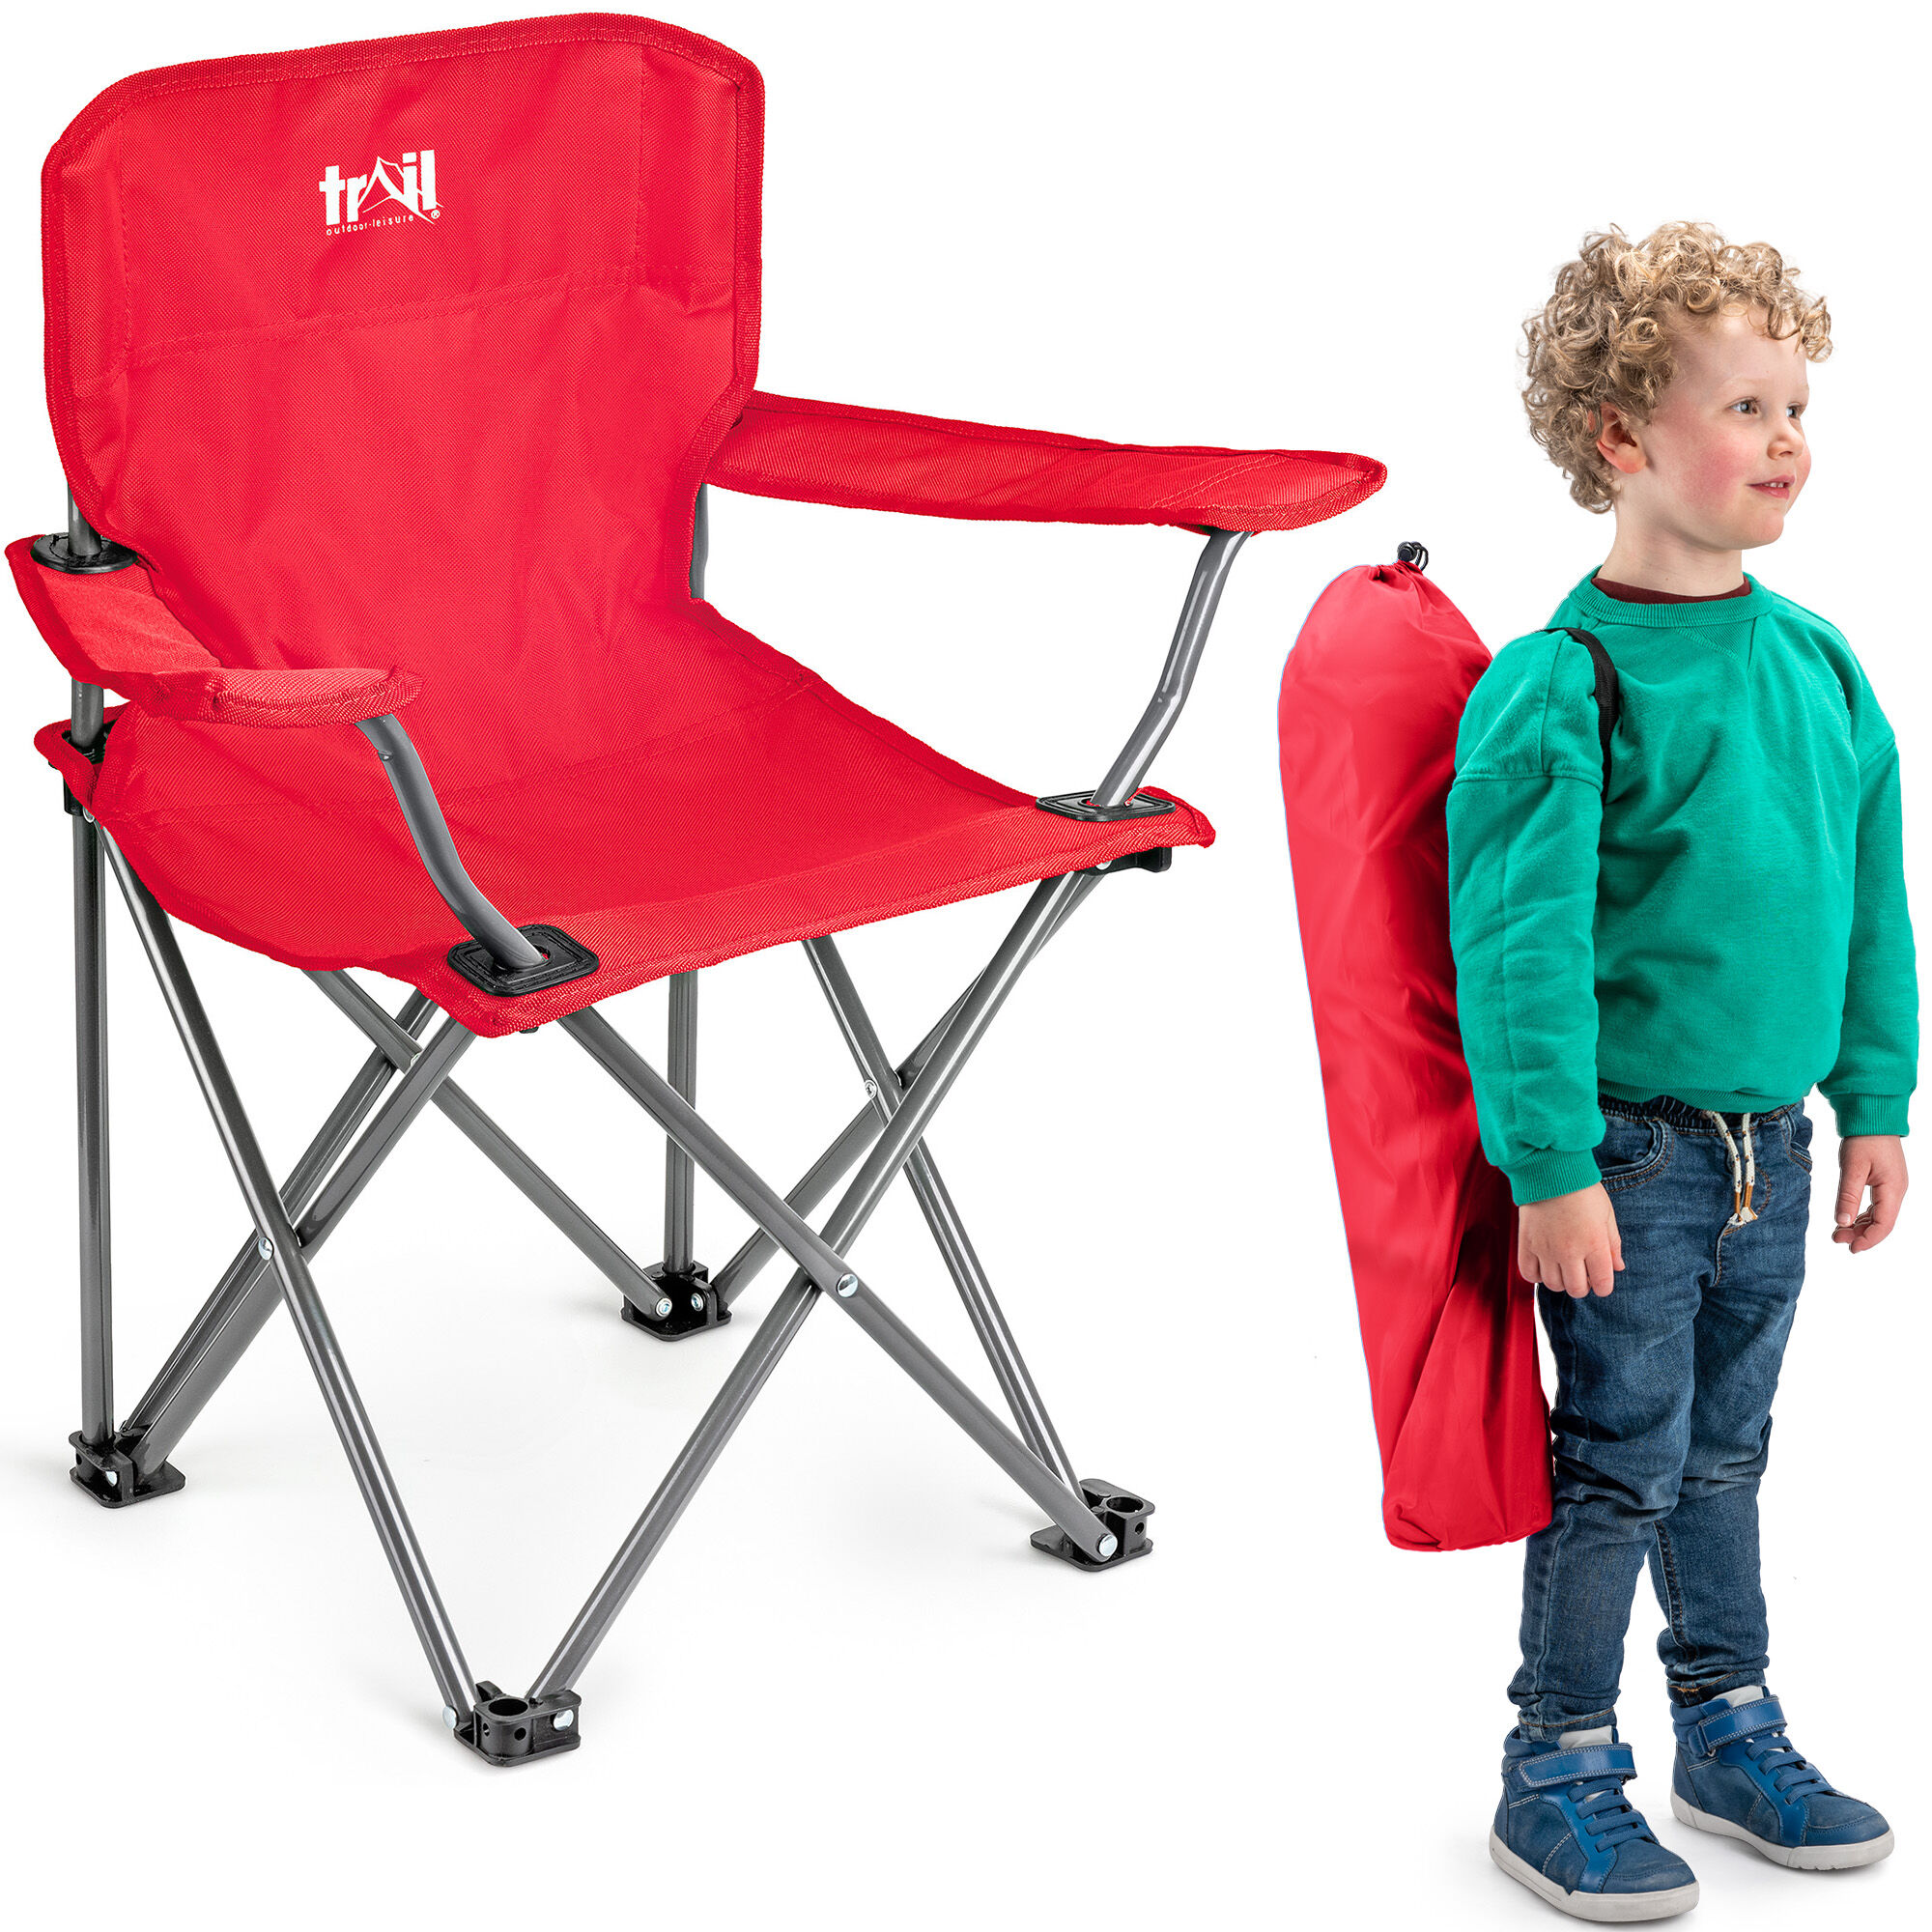 Leisure Eagle Kids Camping Chair Red